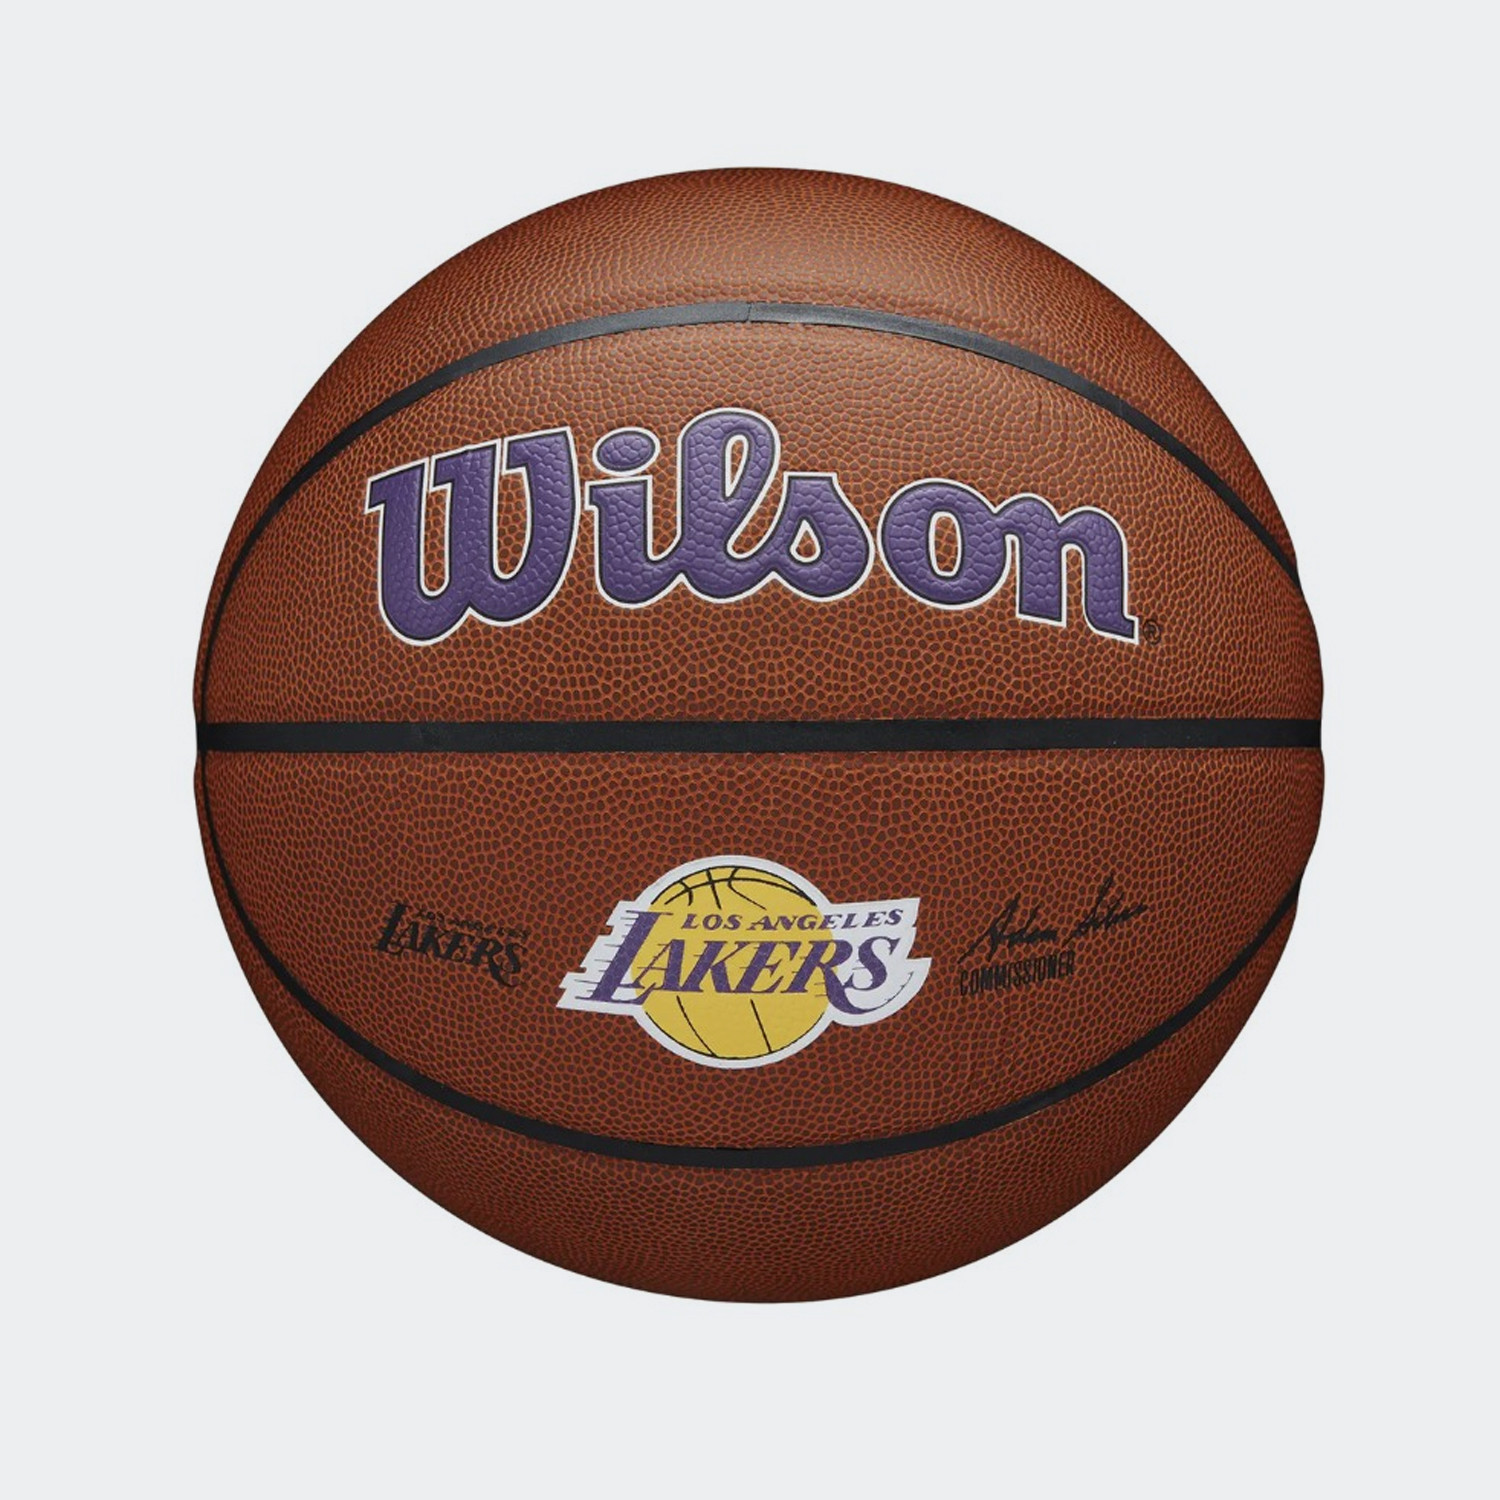 Wilson Los Angeles Lakers Team Alliance Μπάλα Μπάκσκετ No7 (9000098917_58104)